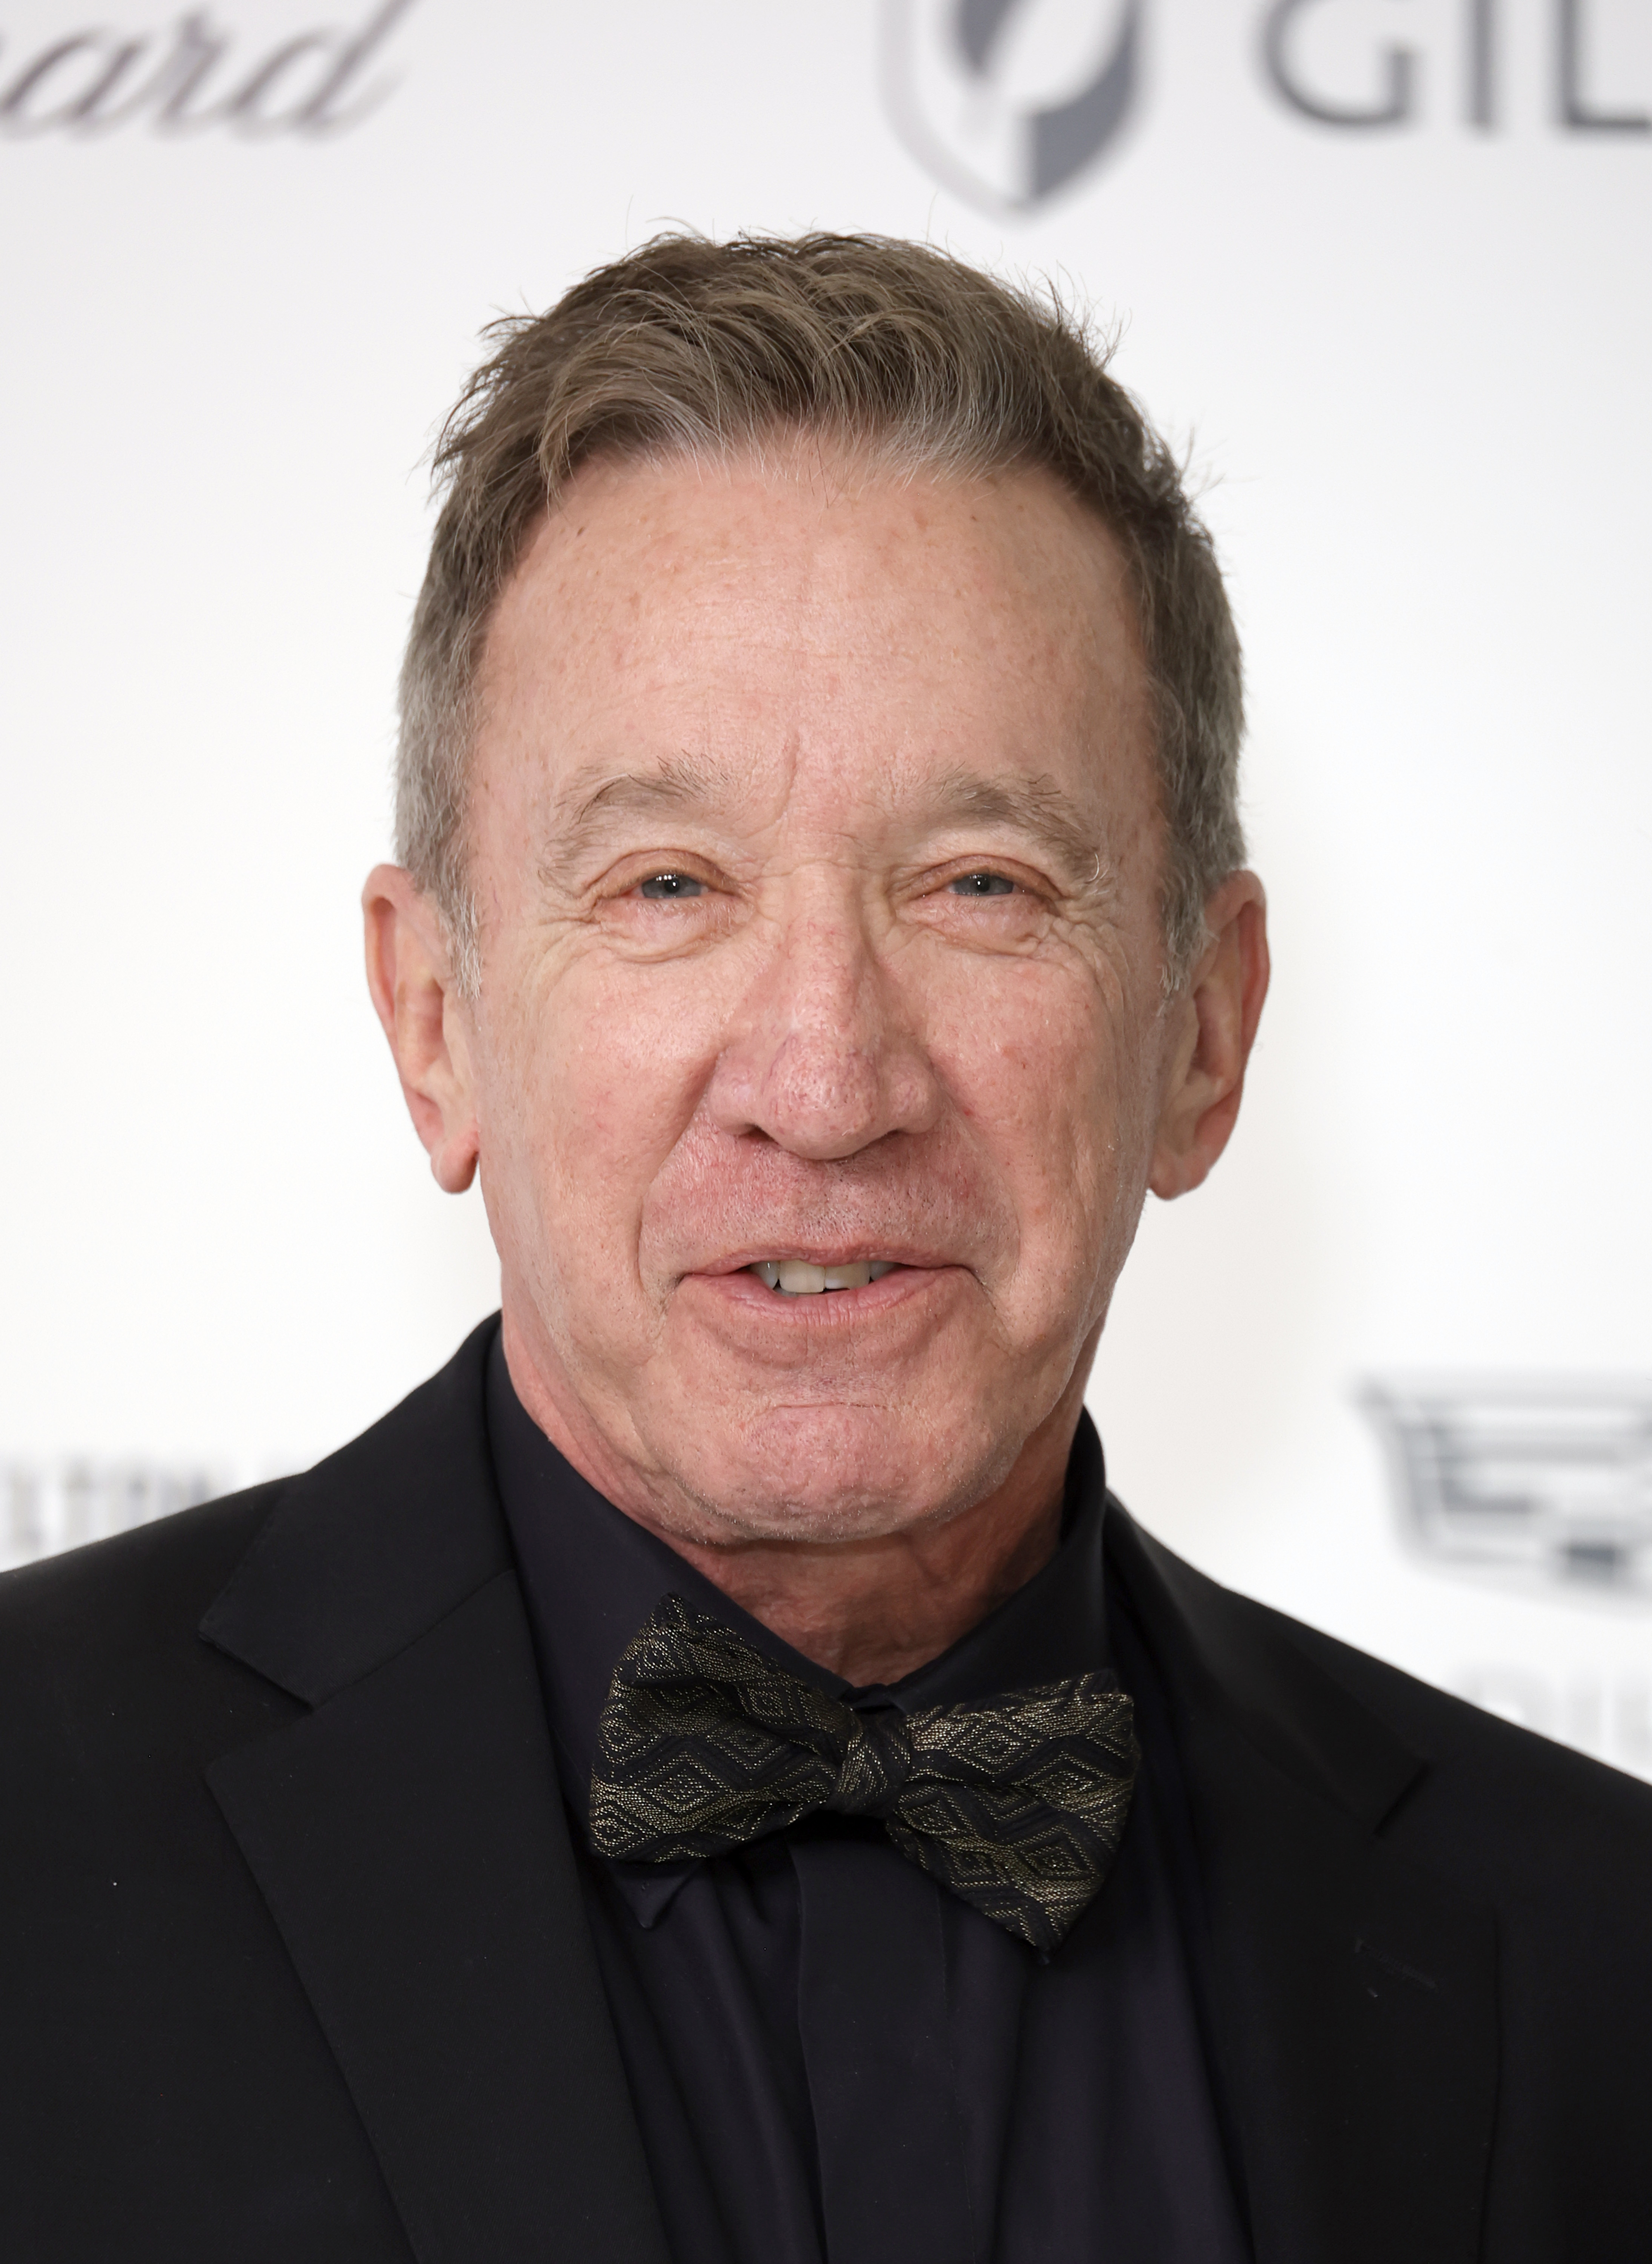 Tim Allen at an event in a black suit and patterned bow tie